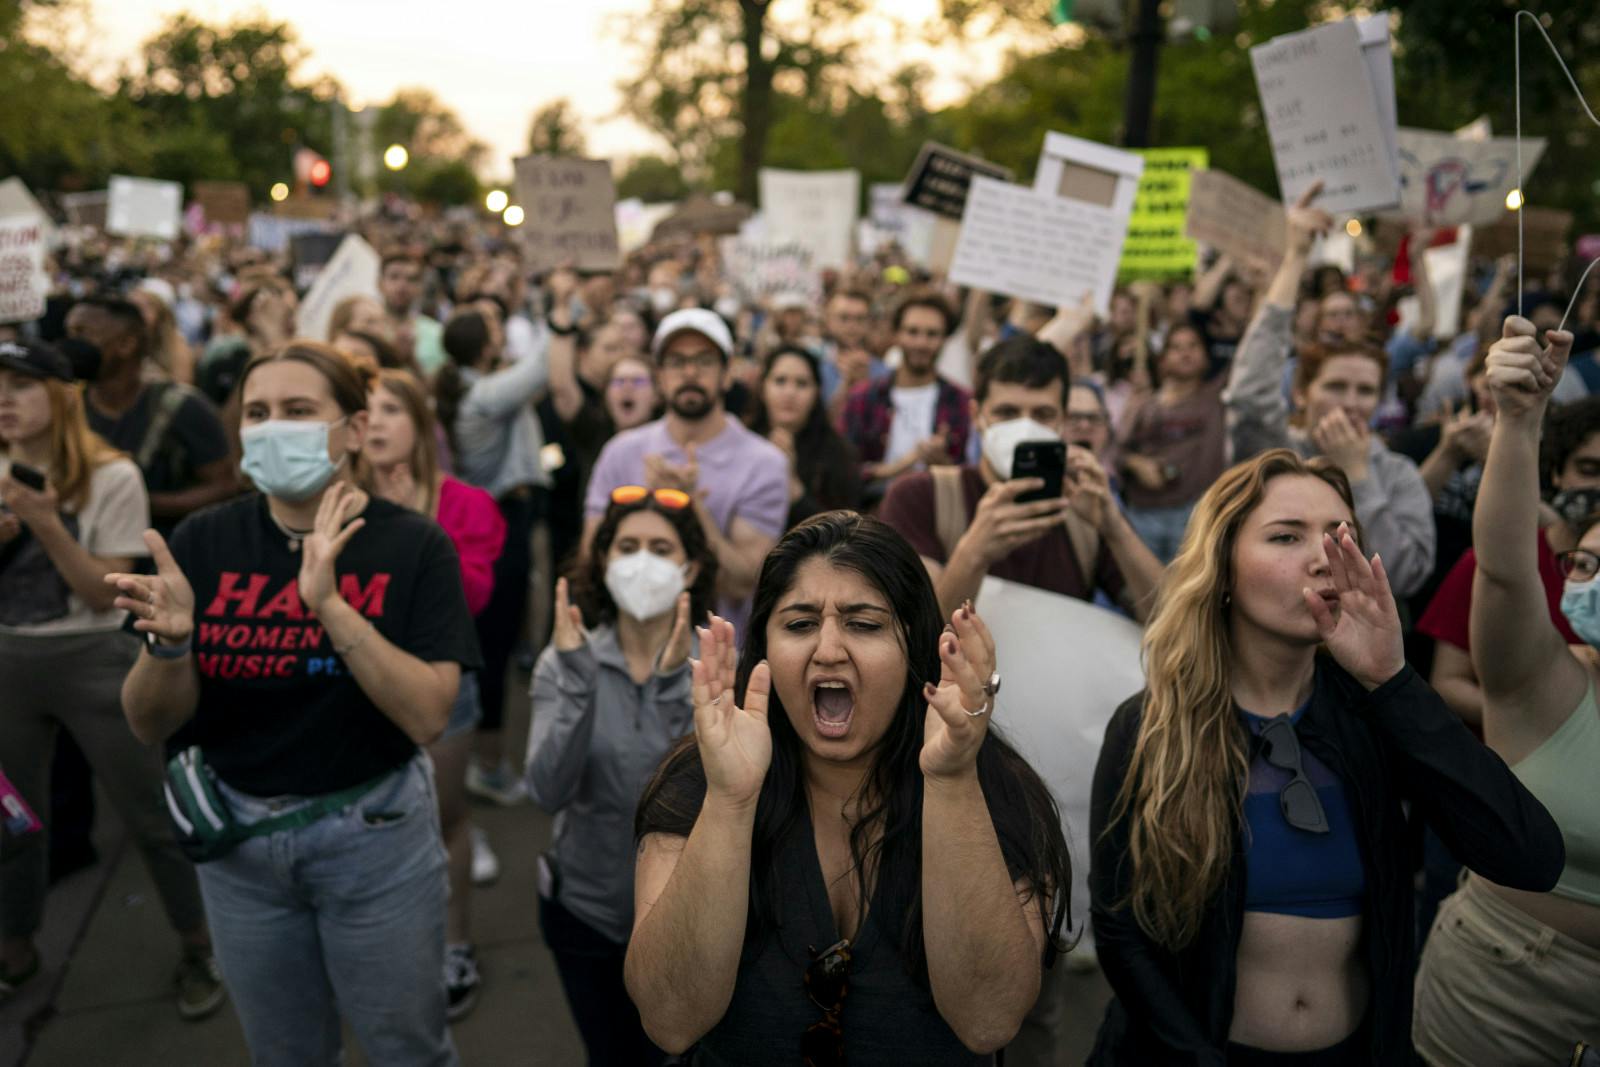 Pro-choice demonstrators on Tuesday, May 3, 2022 in Washington, DC (Kent Nishimura / Los Angeles Times via Getty Images)